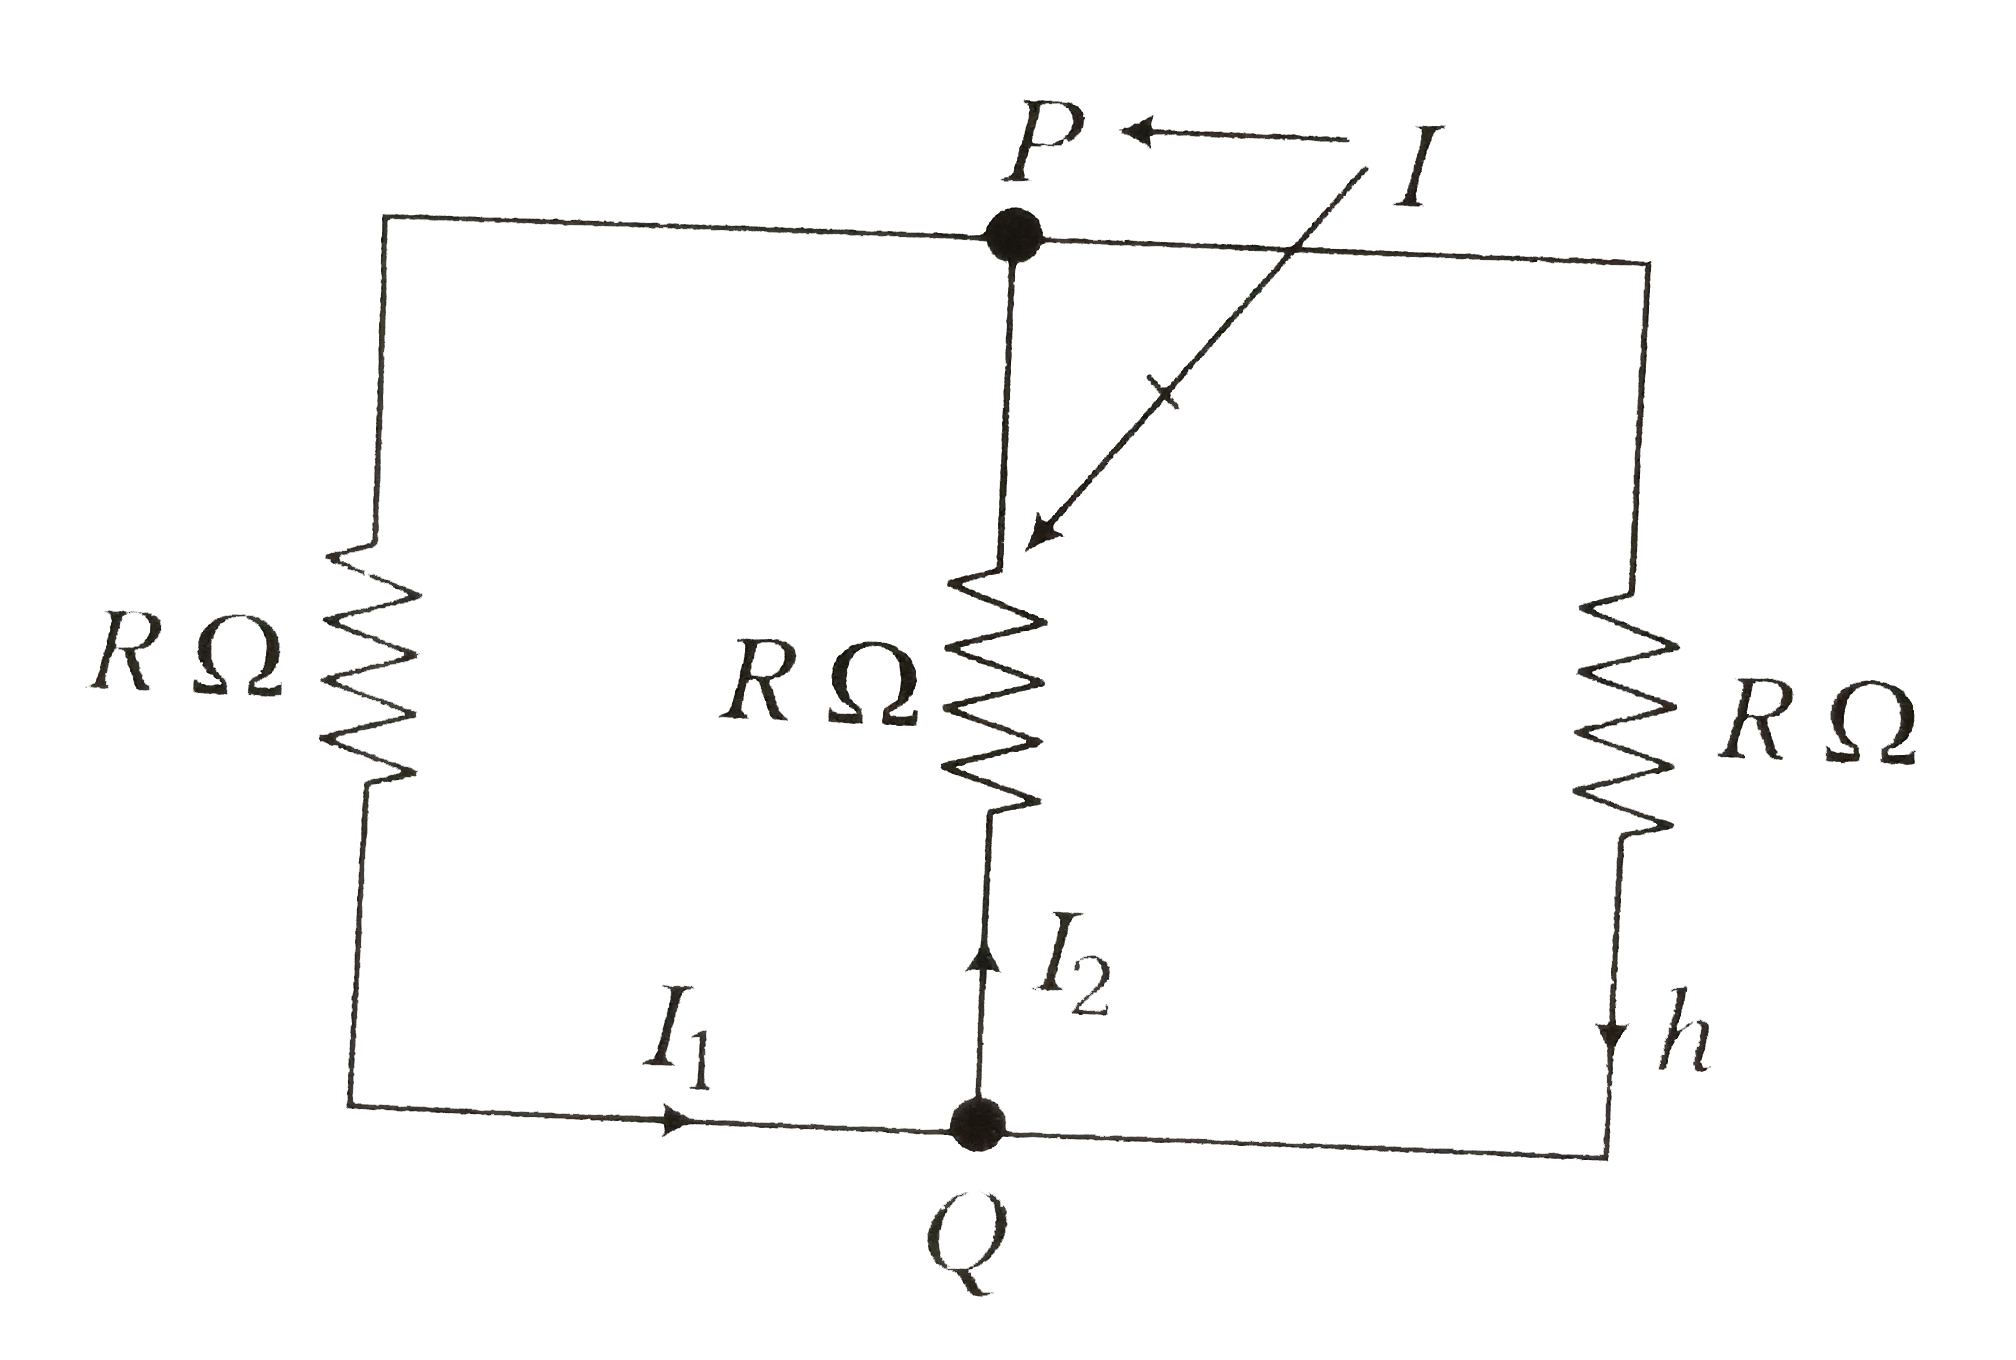 A rectangular loop has a sliding connector PQ of length l and resistance ROmega and it is moving with a speed v as shown. The set up is placed in a uniform magnetic field going into the plane of the paper. The three currents I(1),I(2) and I are